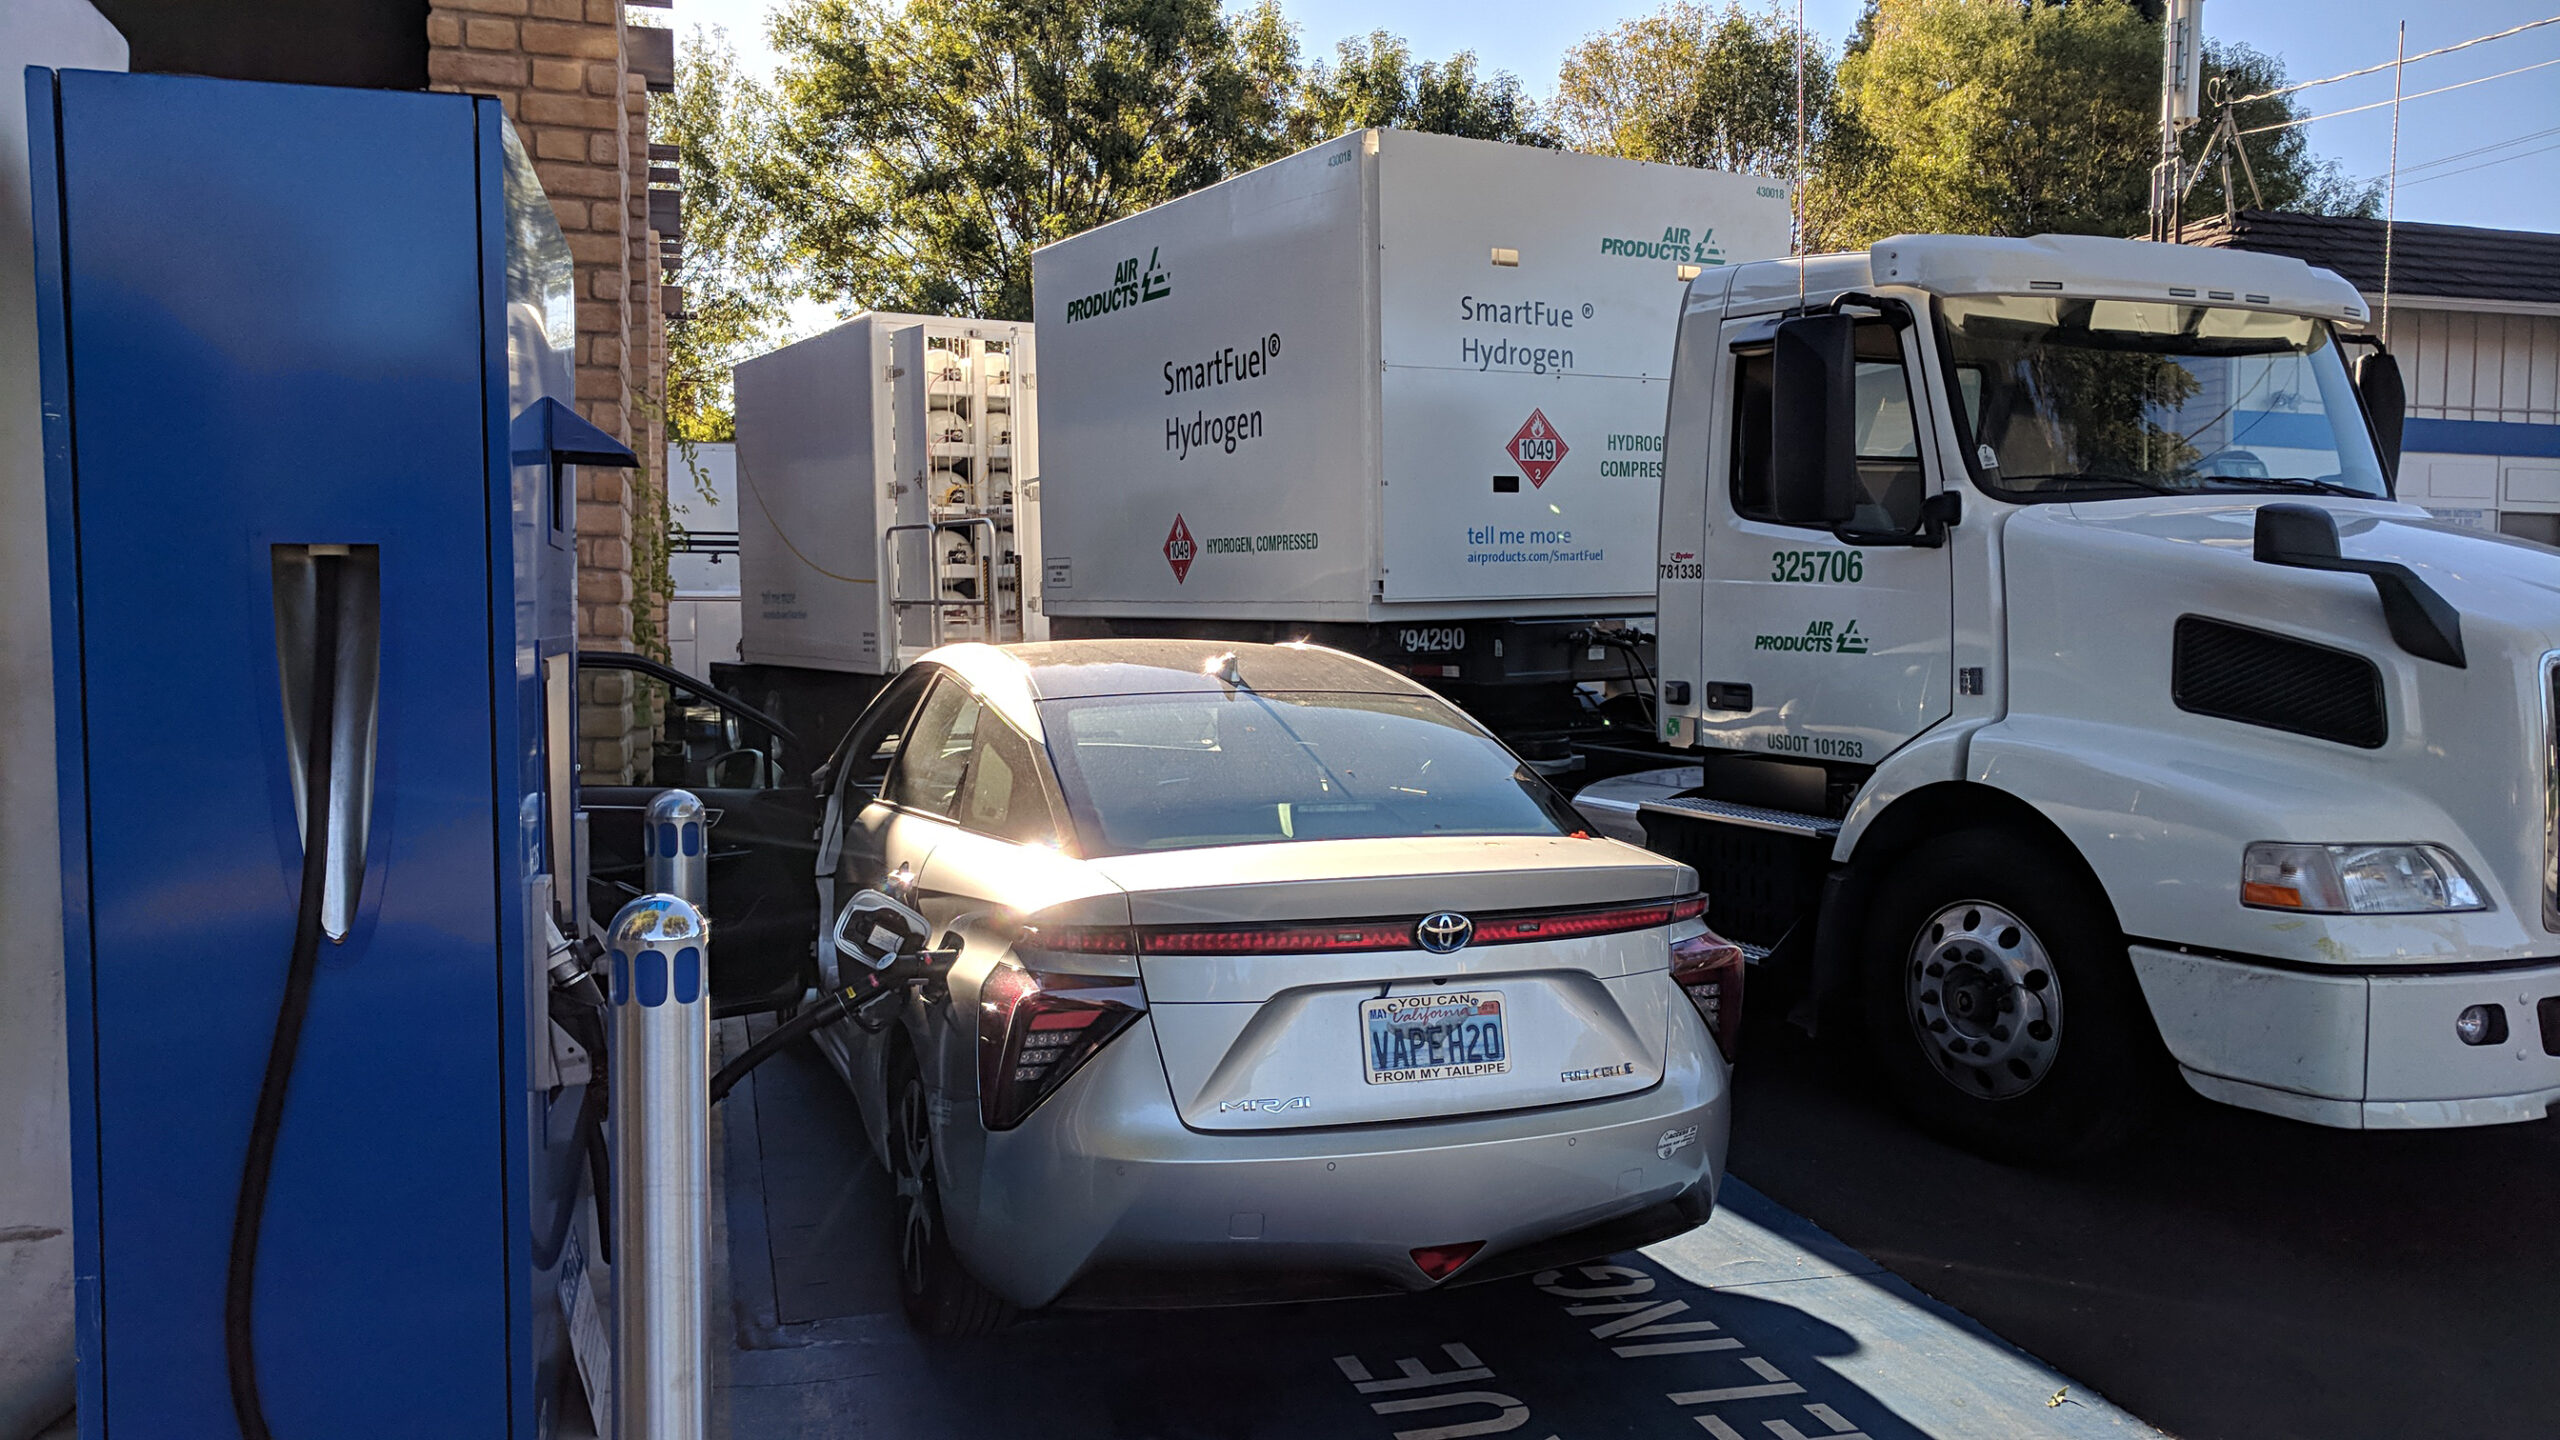 Fueling at hydrogen pumps is generally comparable in terms of time and convenience of fueling at gasoline stations. Source: https://commons.wikimedia.org/wiki/File:Hydrogen_fueling.jpg Dick Lyon, Wikimedia